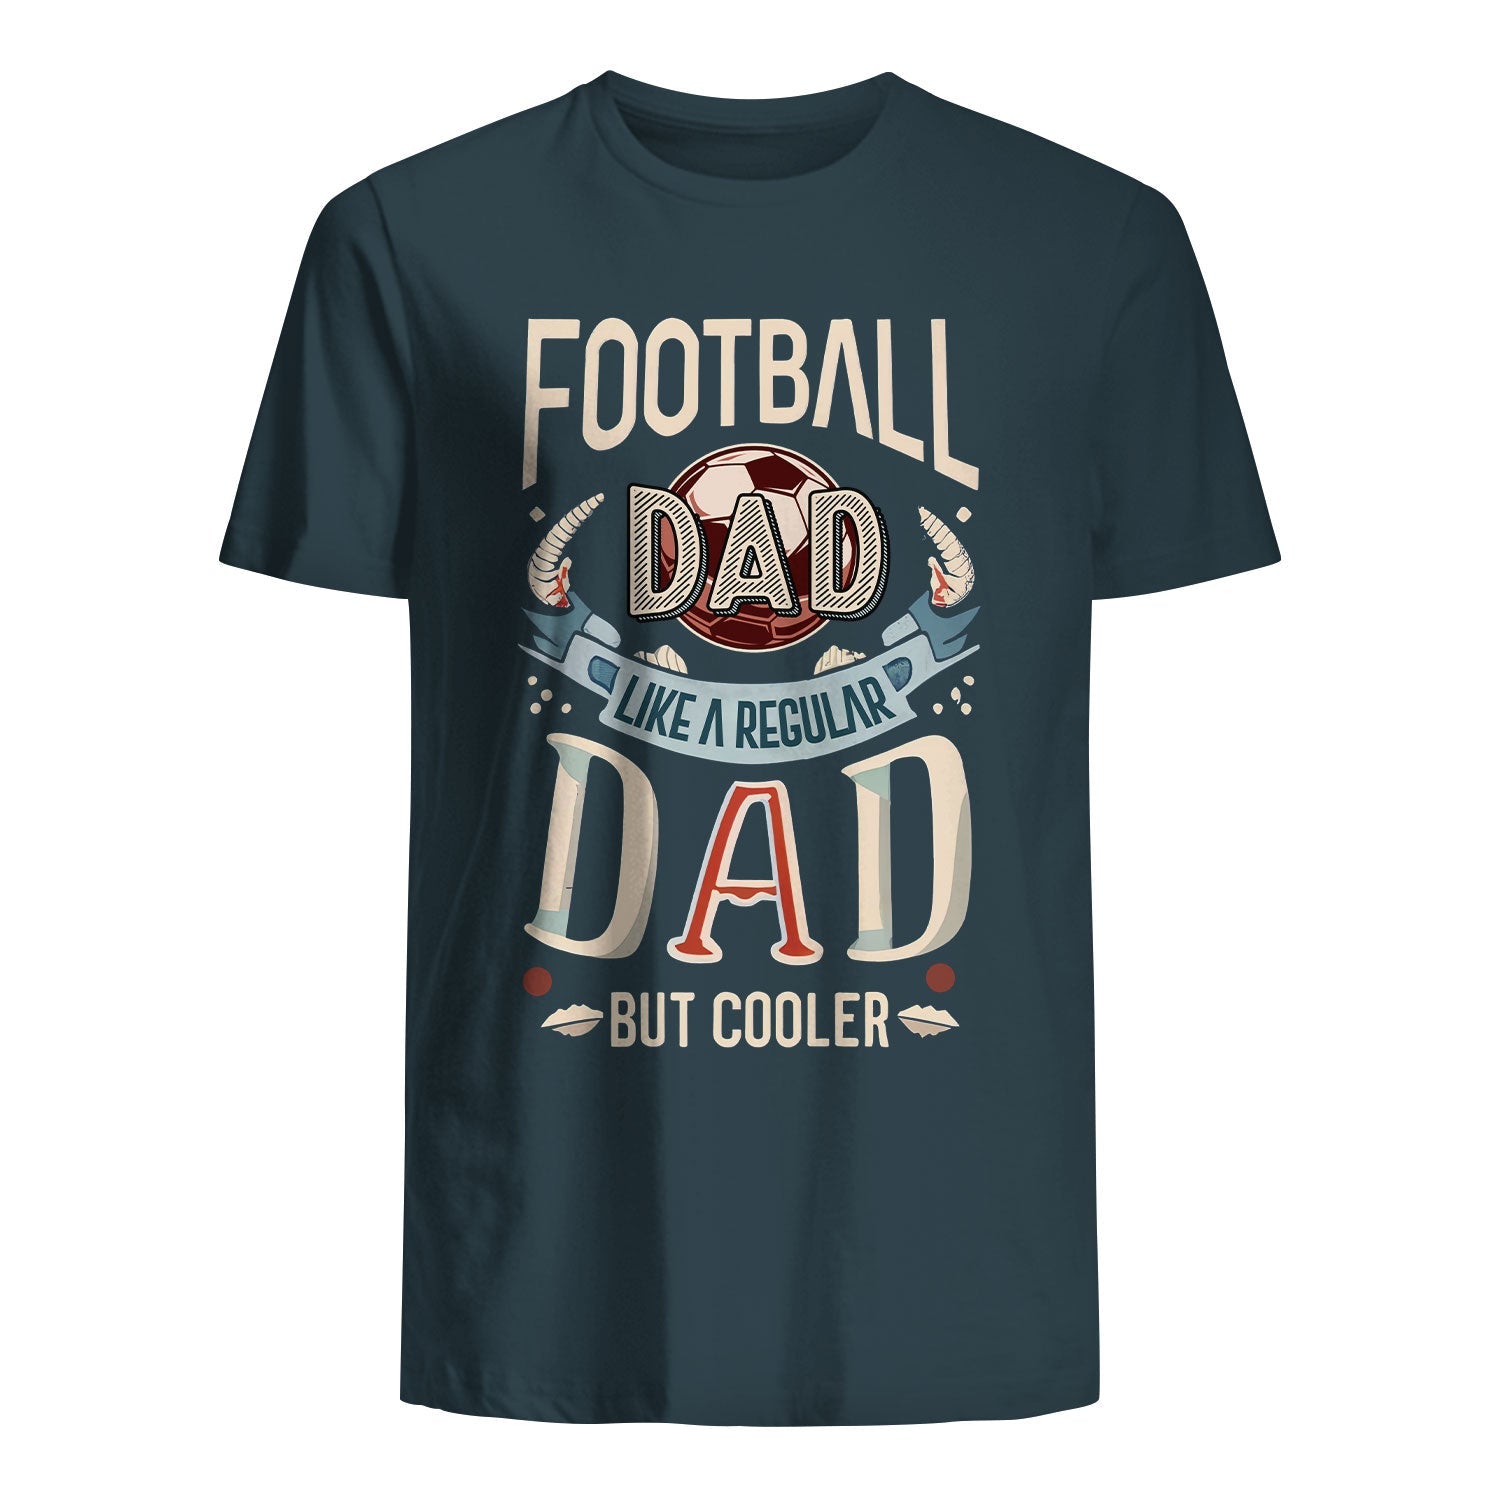 T-shirt for Dad - Football Dad Like A Regular Dad But Cooler 1